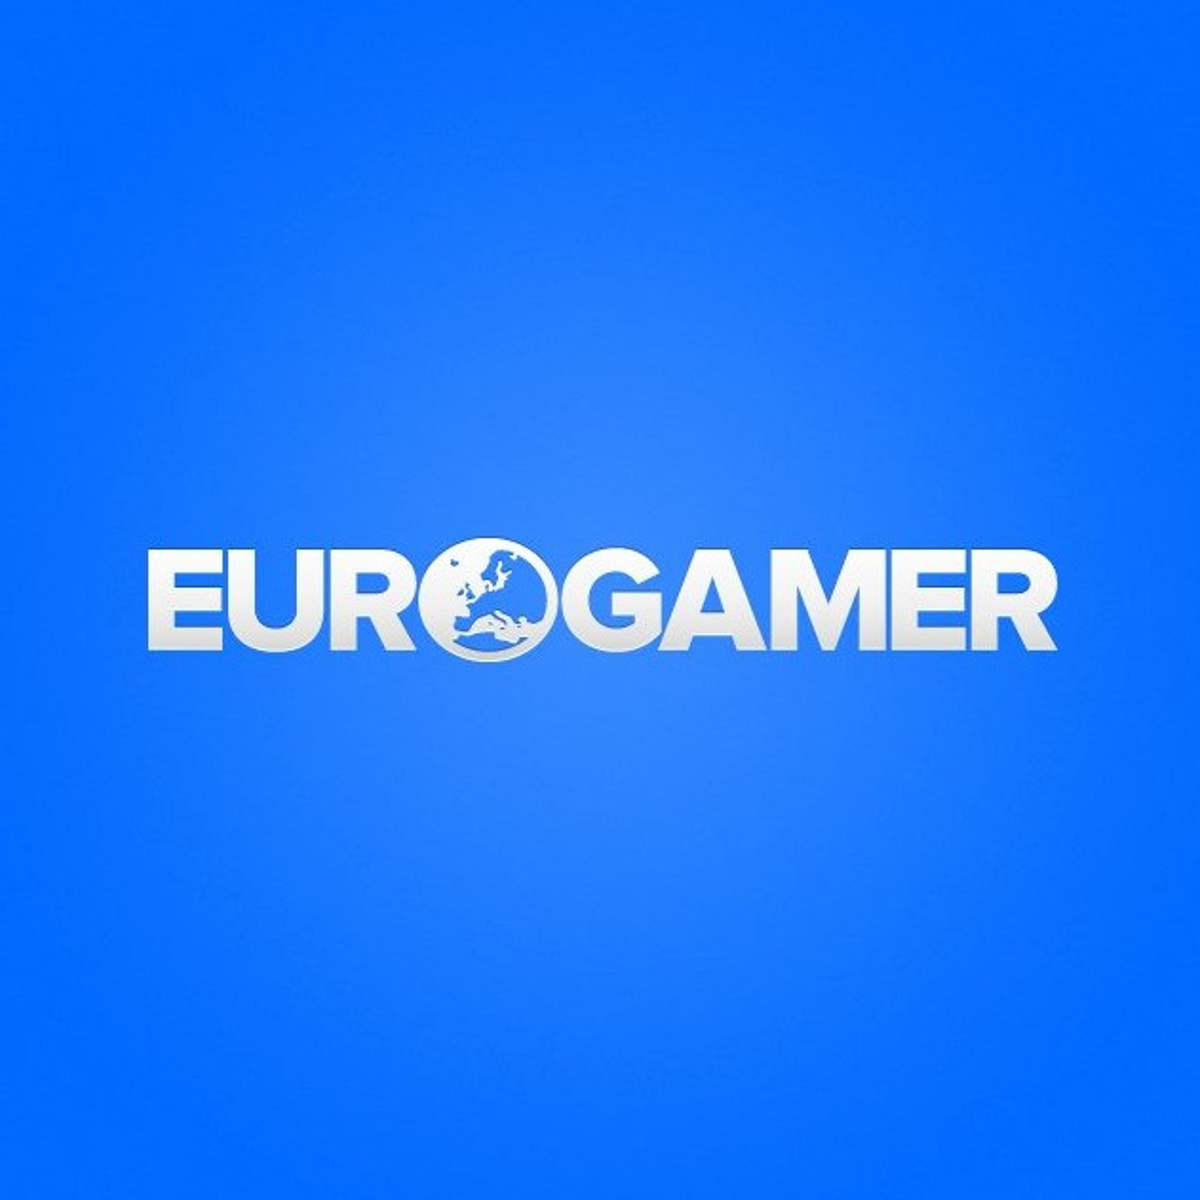 Eurogamer reviews are changing